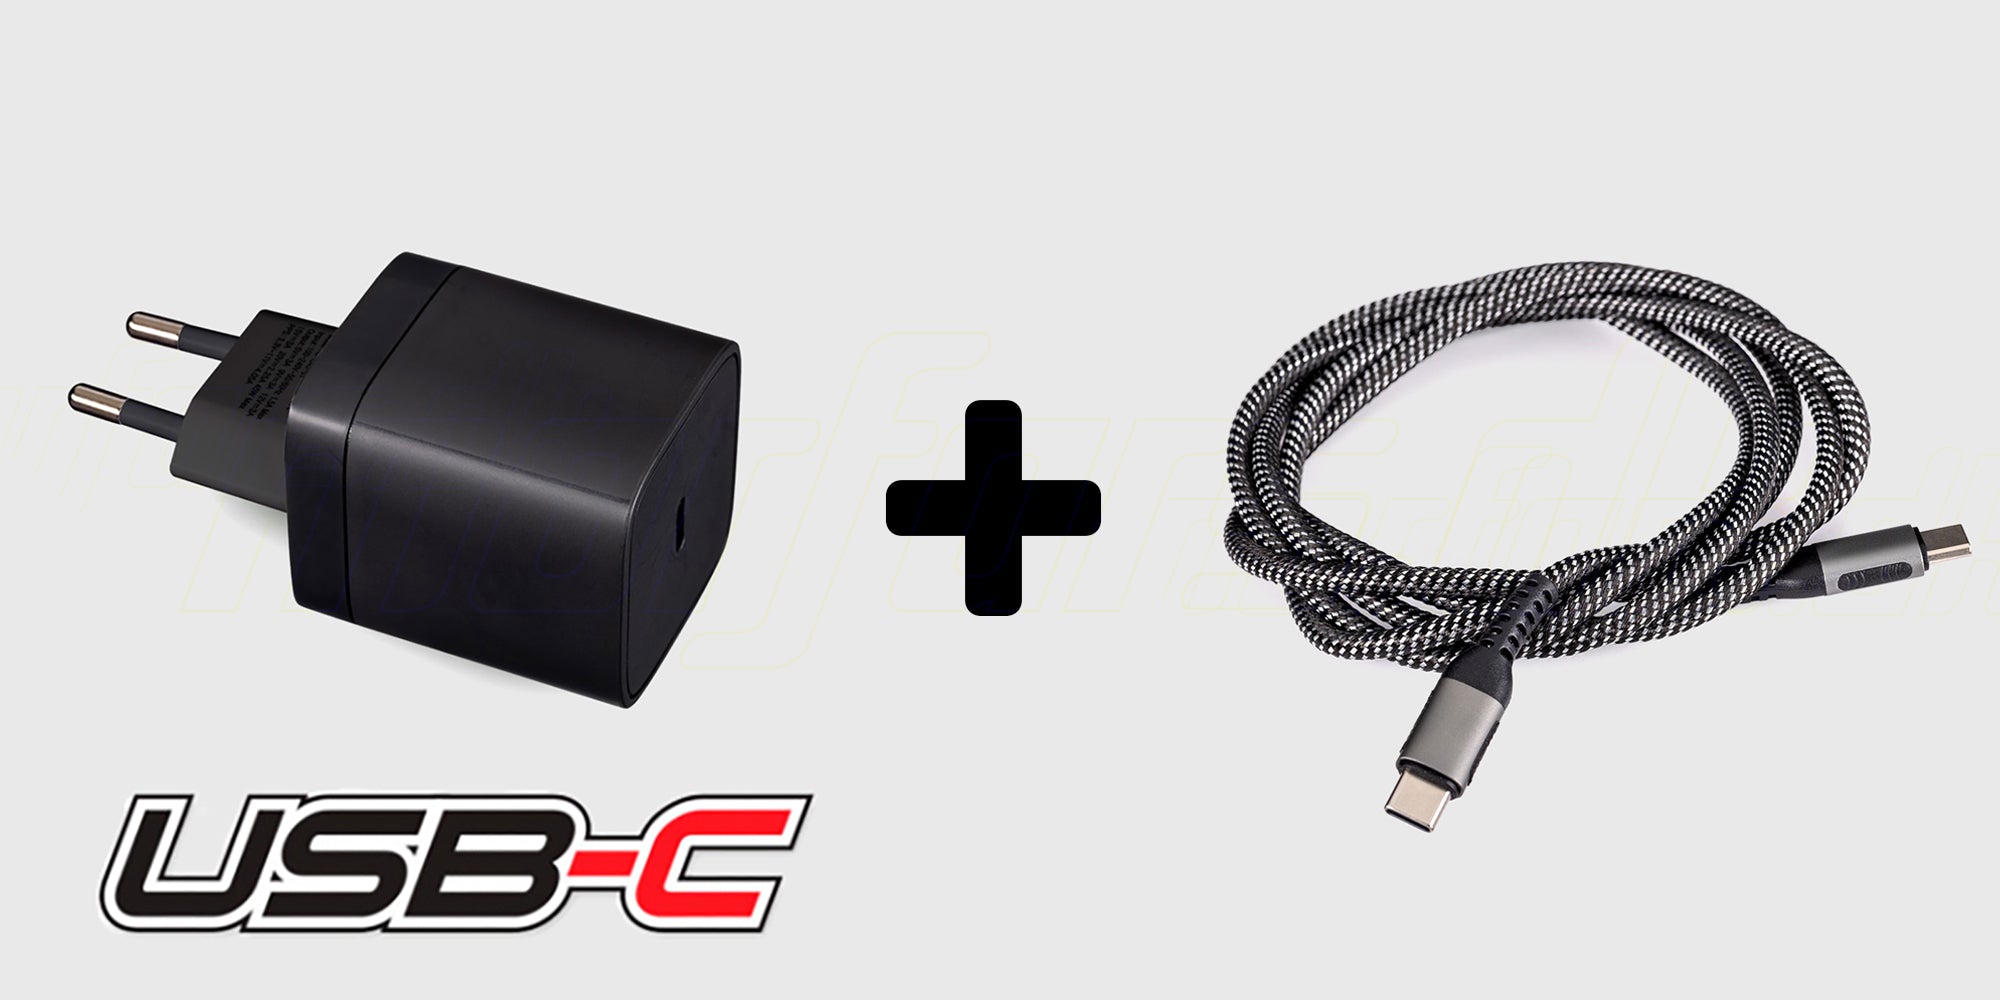 Traxxas USB-C Complete Adapter + Cable